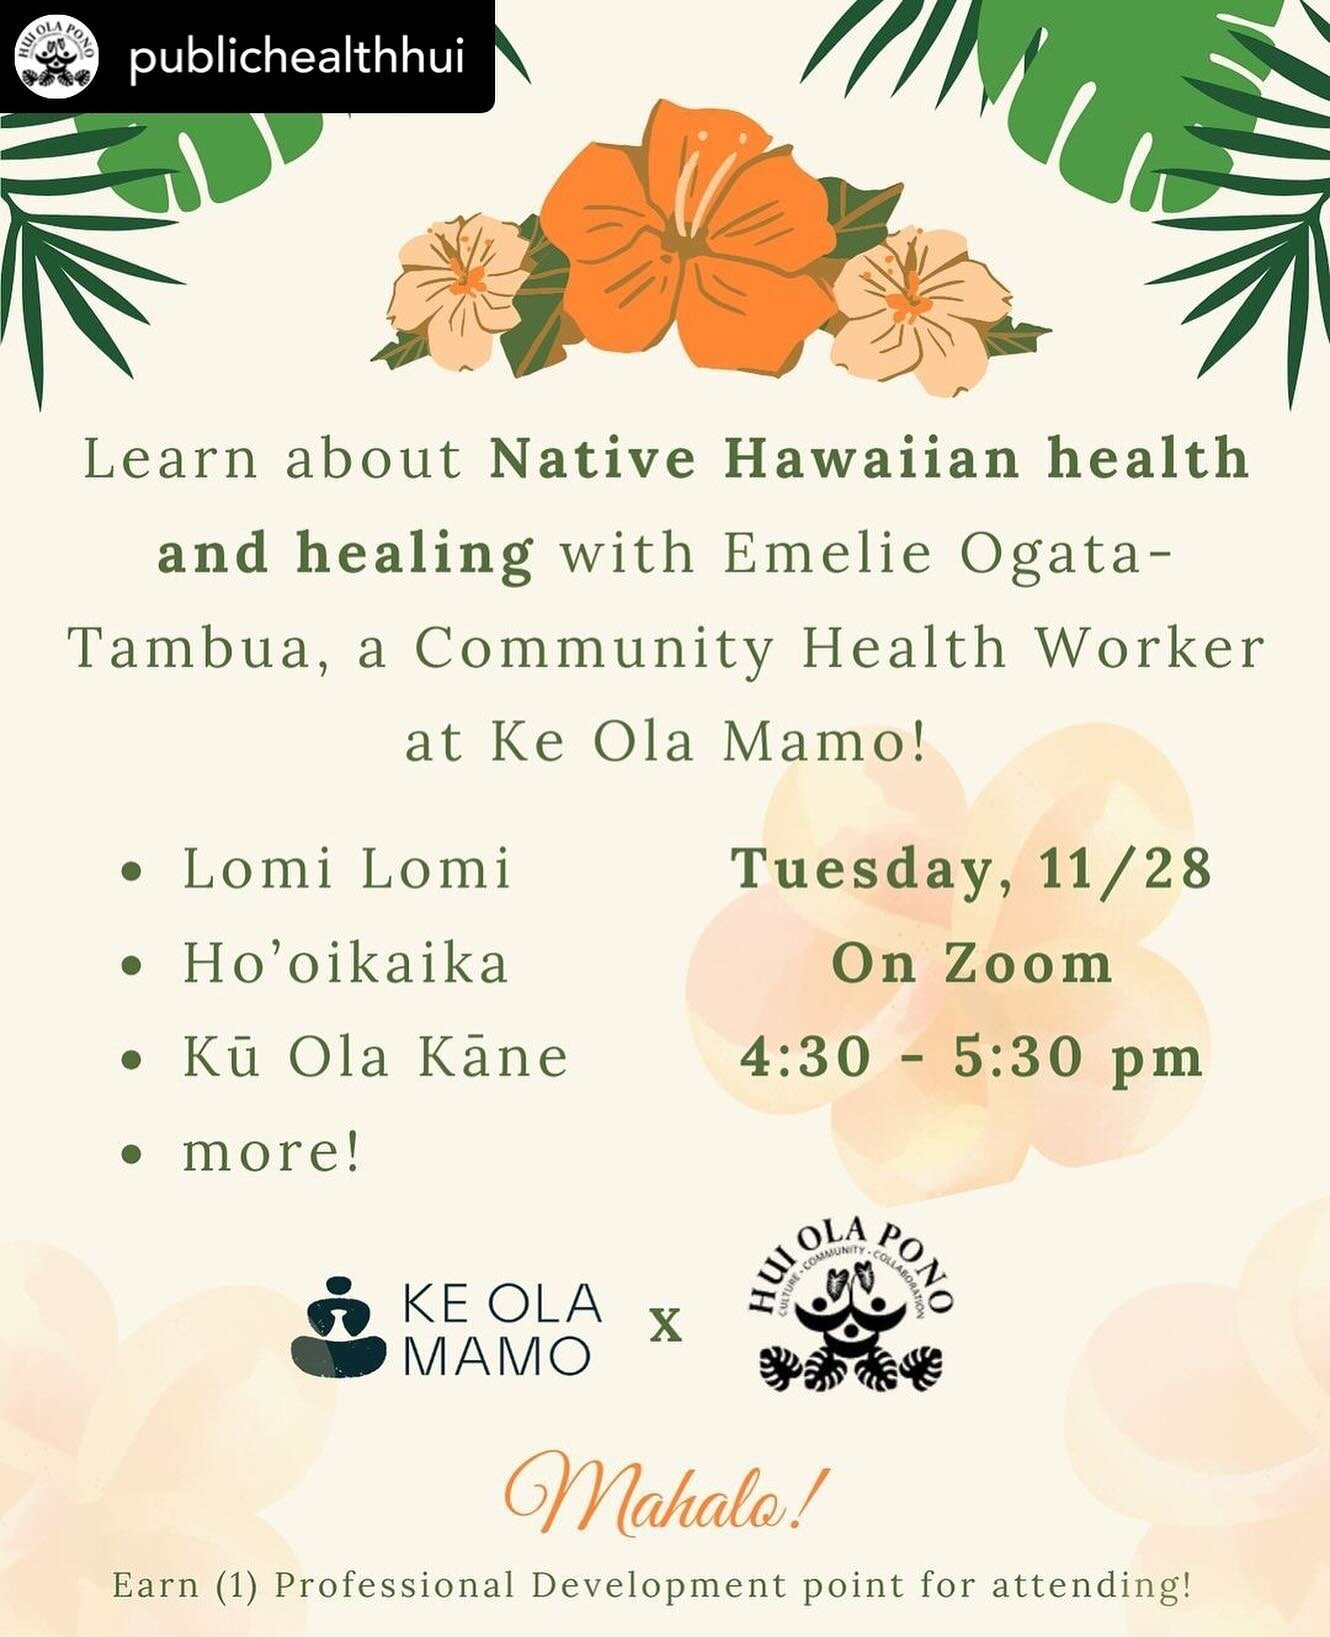 Posted @withregram &bull; @publichealthhui 🌿 Our Public Health theme of November is Native Hawaiian &amp; Indigenous Health! We are so excited to host this informational event with Emelie Ogata-Tambua, a community health worker from Ke Ola Mamo!
.
N